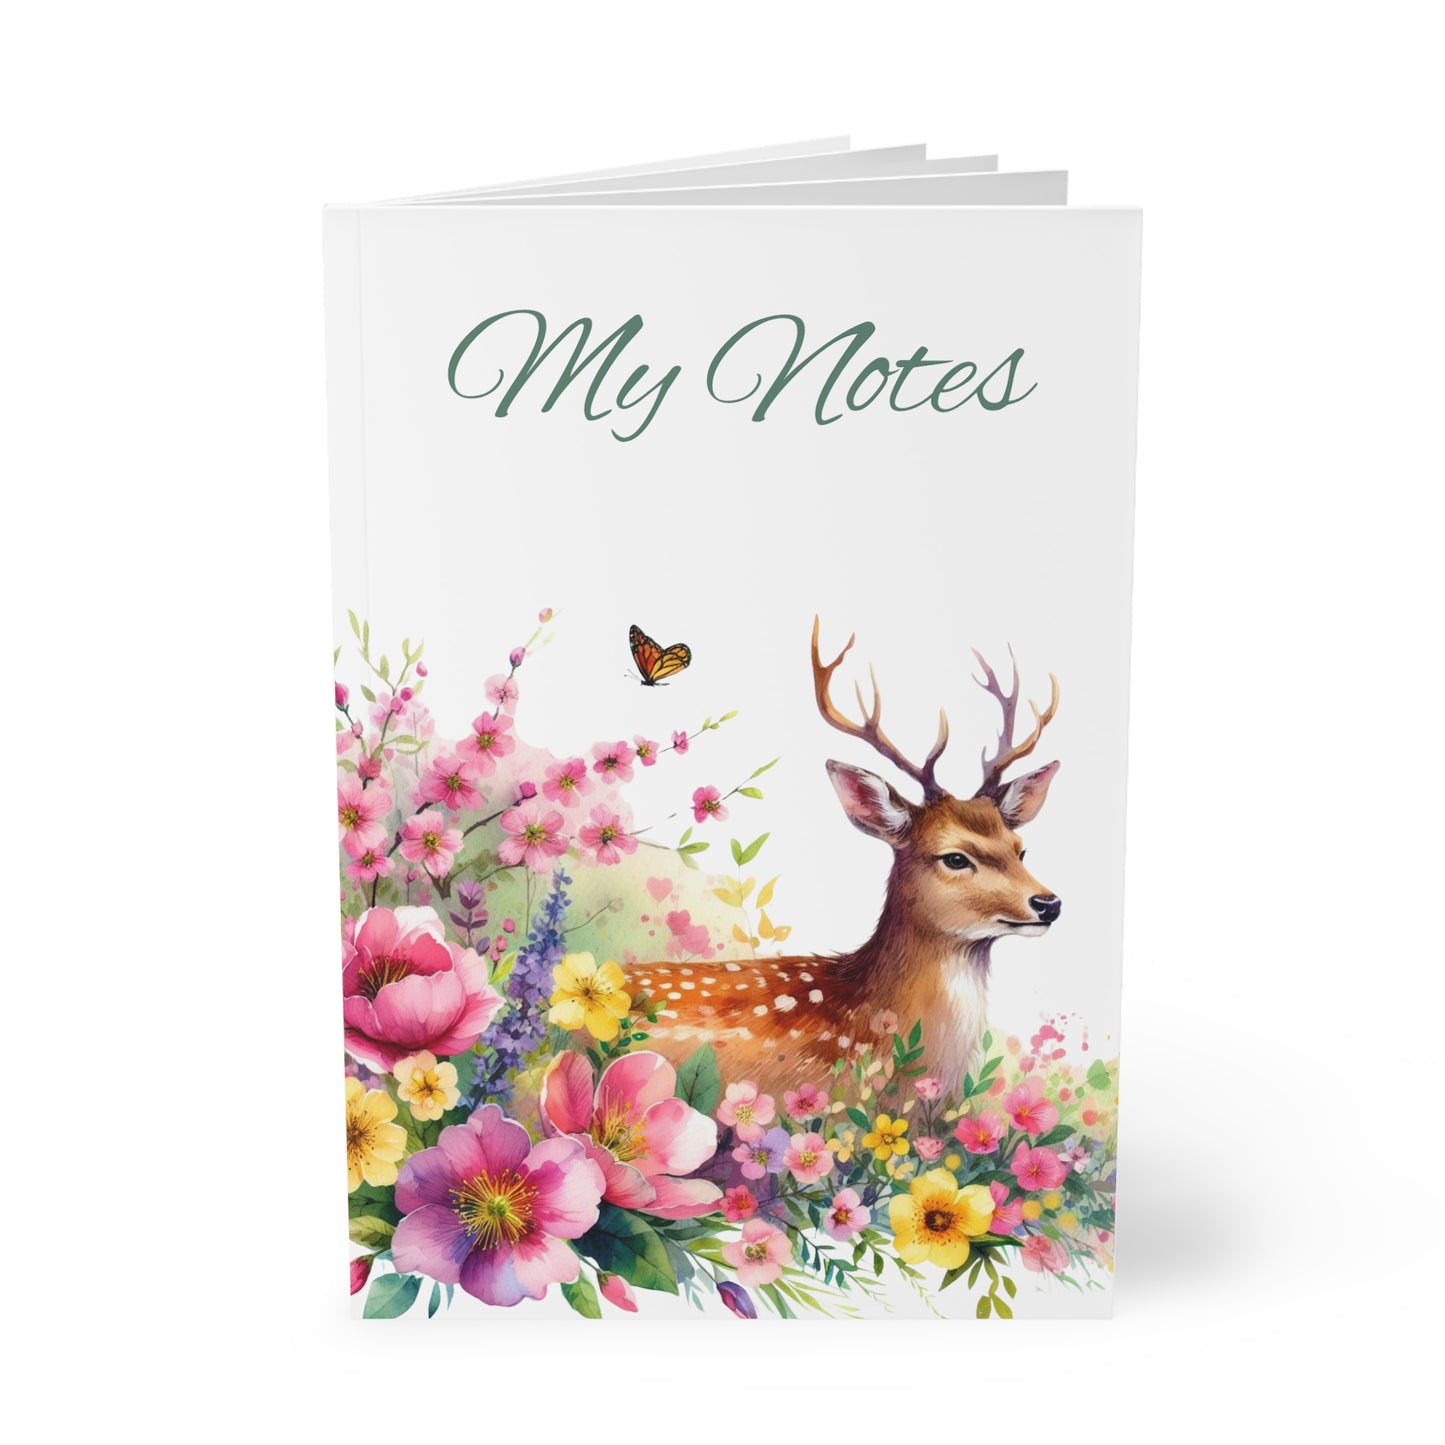 Deer Softback Notebook | Stationery by Hope Valley Home